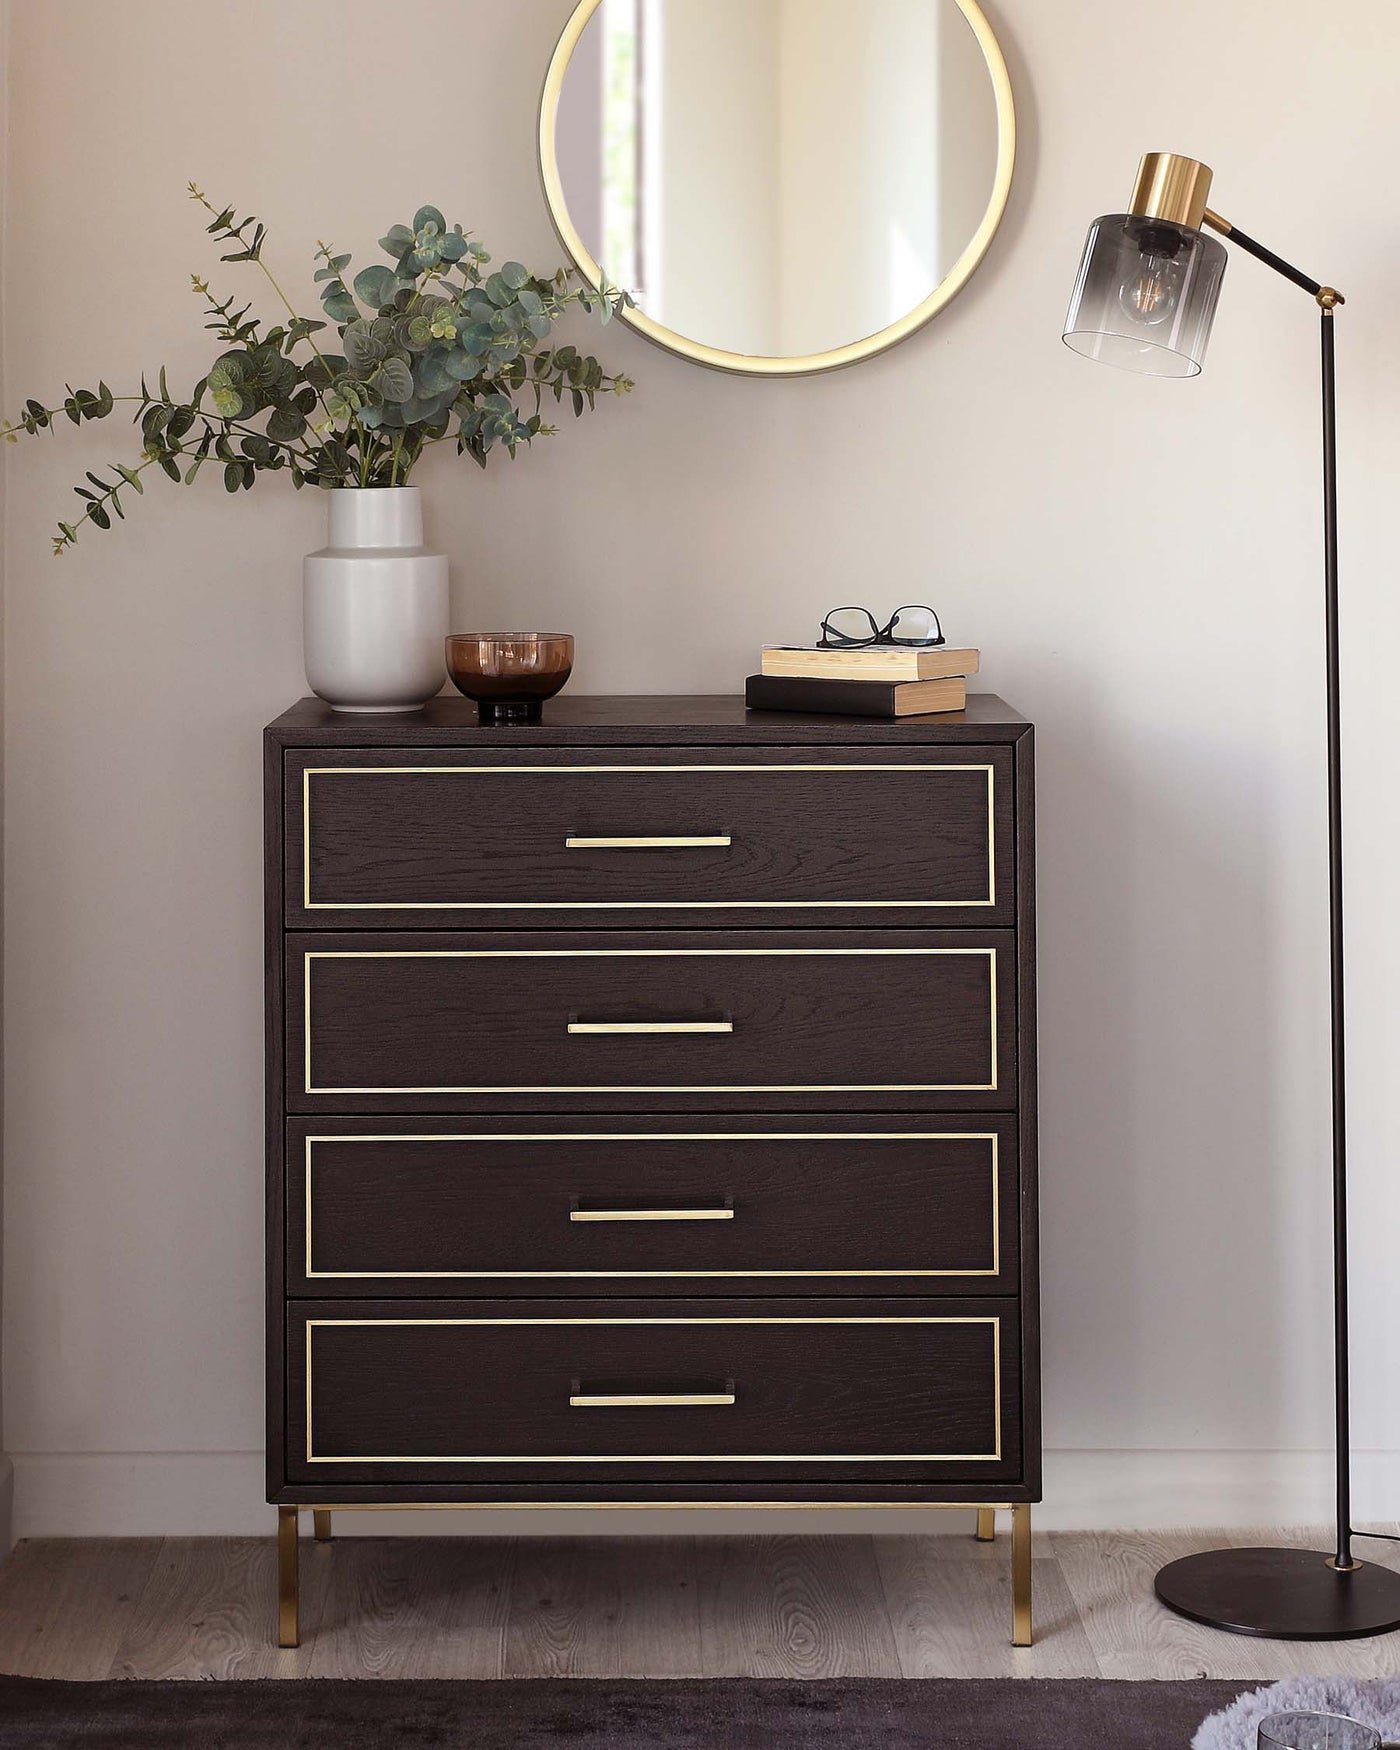 A contemporary dark wood five-drawer chest with brass-finished metal handles and legs, styled with a white vase of eucalyptus, a wooden bowl, books, glasses, and an adjacent floor lamp with a brass base and a clear shade. There is a circular gold-coloured framed mirror on the wall above the chest.